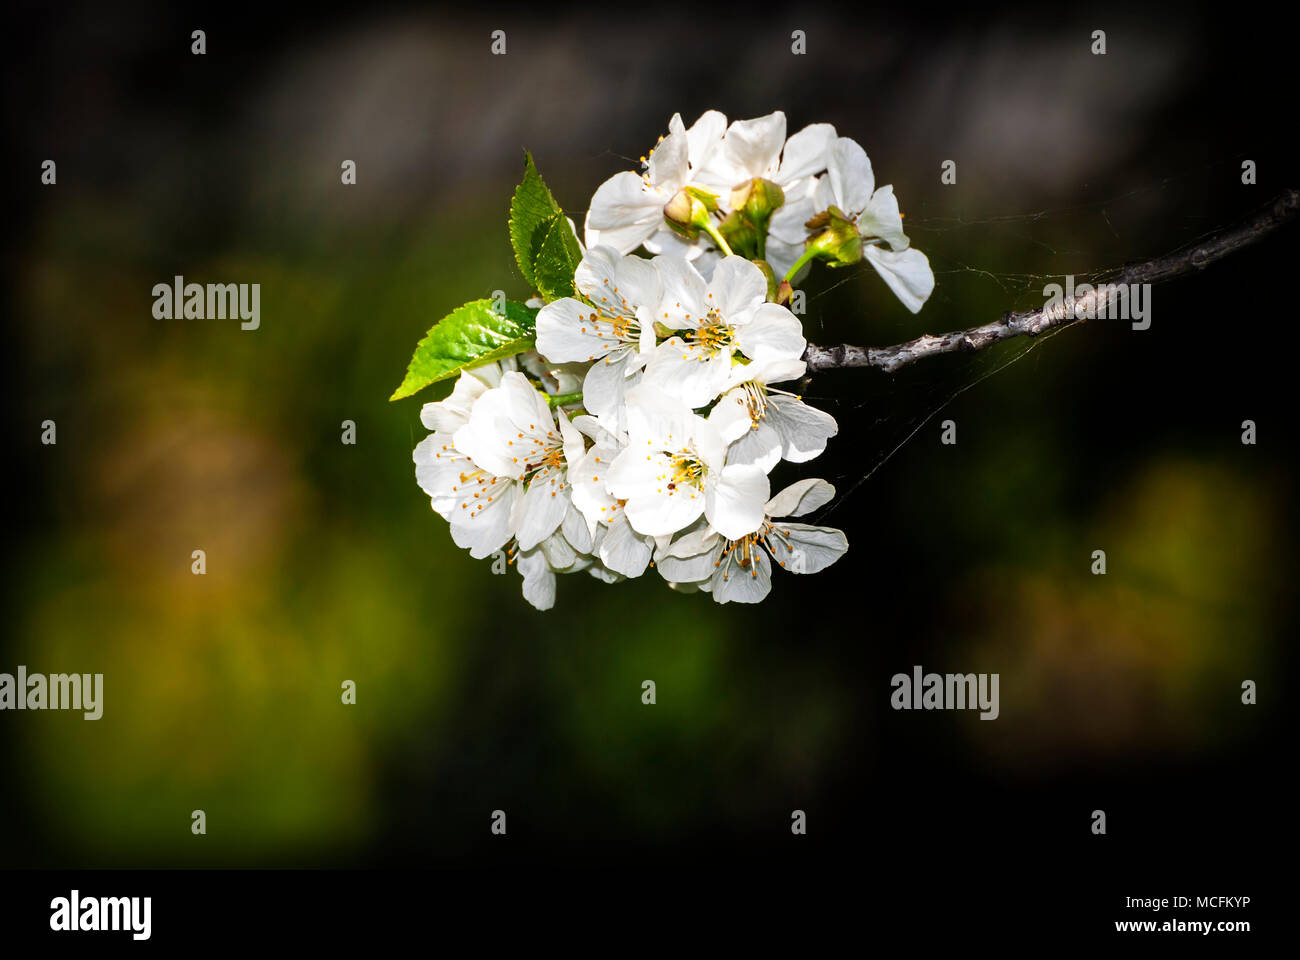 Branch of white spring blossom with spiderweb. Stock Photo